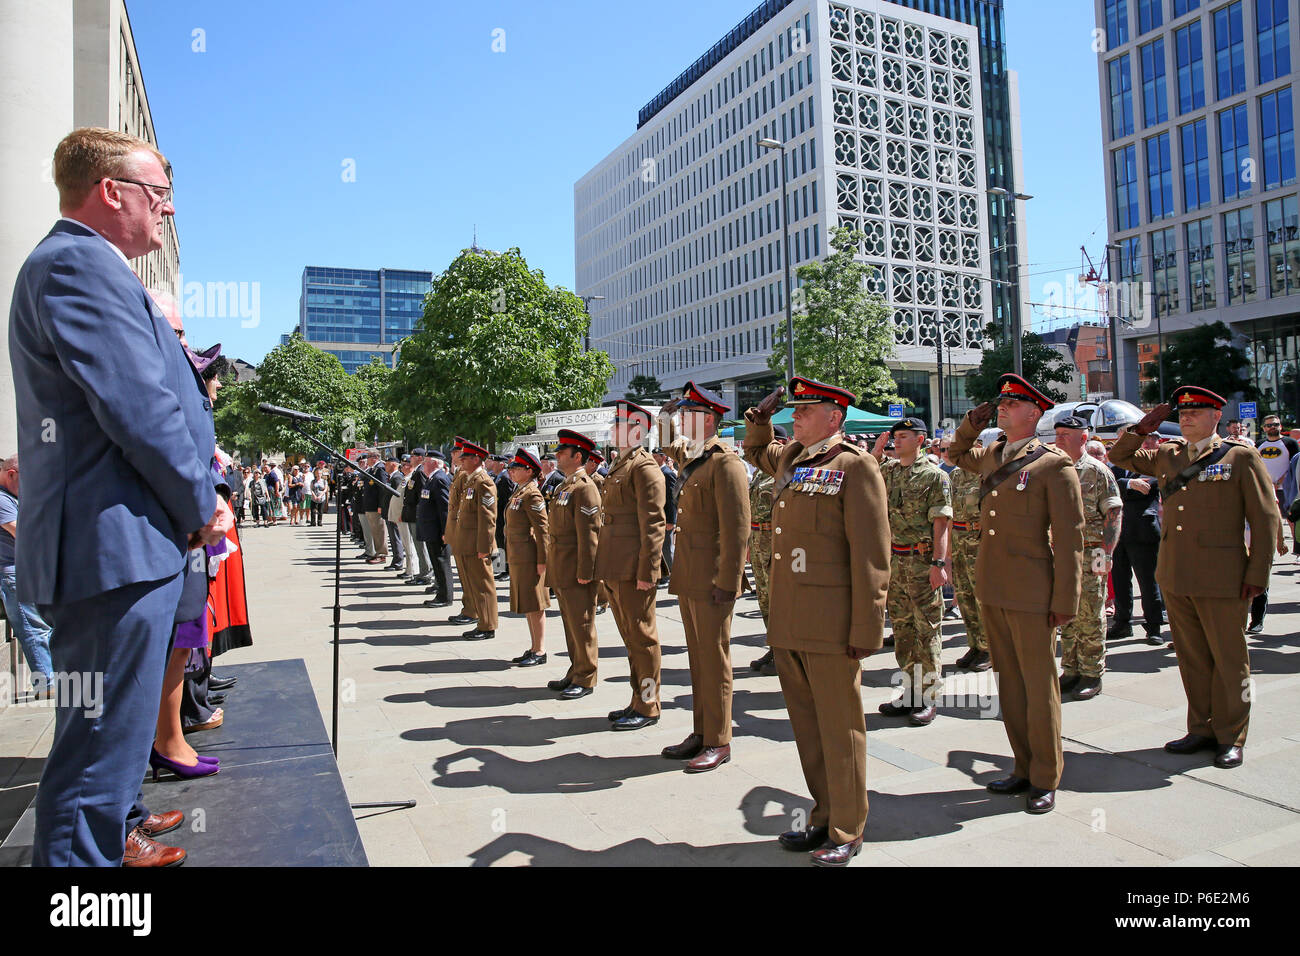 Manchester, UK, 30 June 2018. Parade salute during celebrations of Armed Forces Day where the public are given the opportunity to meet members of the armed forces and talk to them about the work they do, St Peters Square, Manchester, 30th June, 2018 (C)Barbara Cook/Alamy Live News Stock Photo